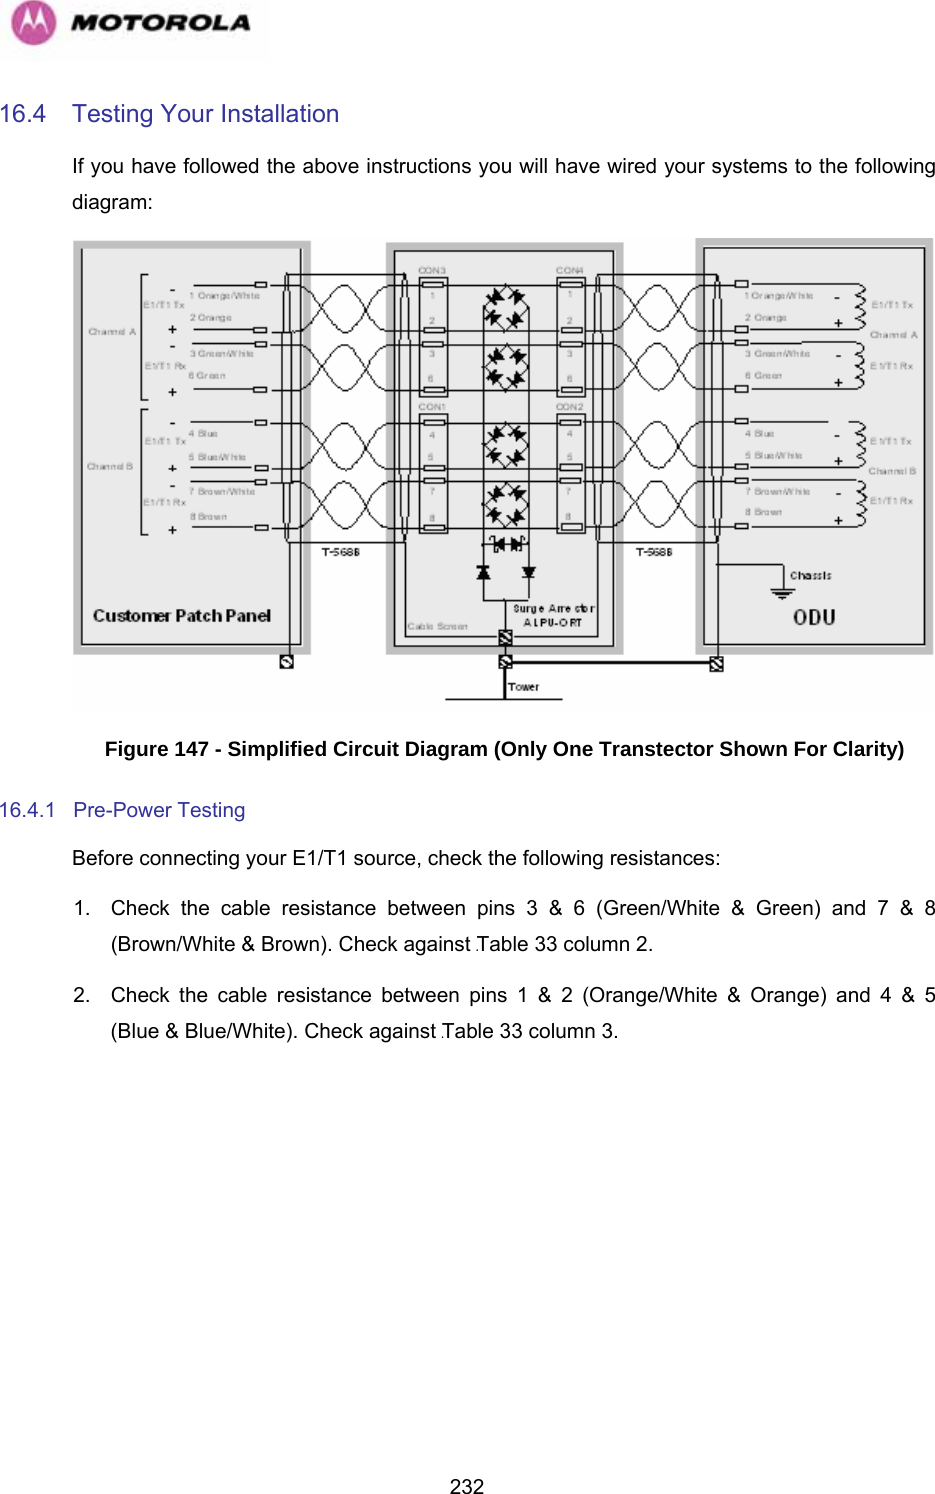   23216.4  Testing Your Installation If you have followed the above instructions you will have wired your systems to the following diagram:  Figure 147 - Simplified Circuit Diagram (Only One Transtector Shown For Clarity) 16.4.1 Pre-Power Testing Before connecting your E1/T1 source, check the following resistances: 1.  Check the cable resistance between pins 3 &amp; 6 (Green/White &amp; Green) and 7 &amp; 8 (Brown/White &amp; Brown). Check against 1241HTable 33 column 2. 2.  Check the cable resistance between pins 1 &amp; 2 (Orange/White &amp; Orange) and 4 &amp; 5 (Blue &amp; Blue/White). Check against 1242HTable 33 column 3. 